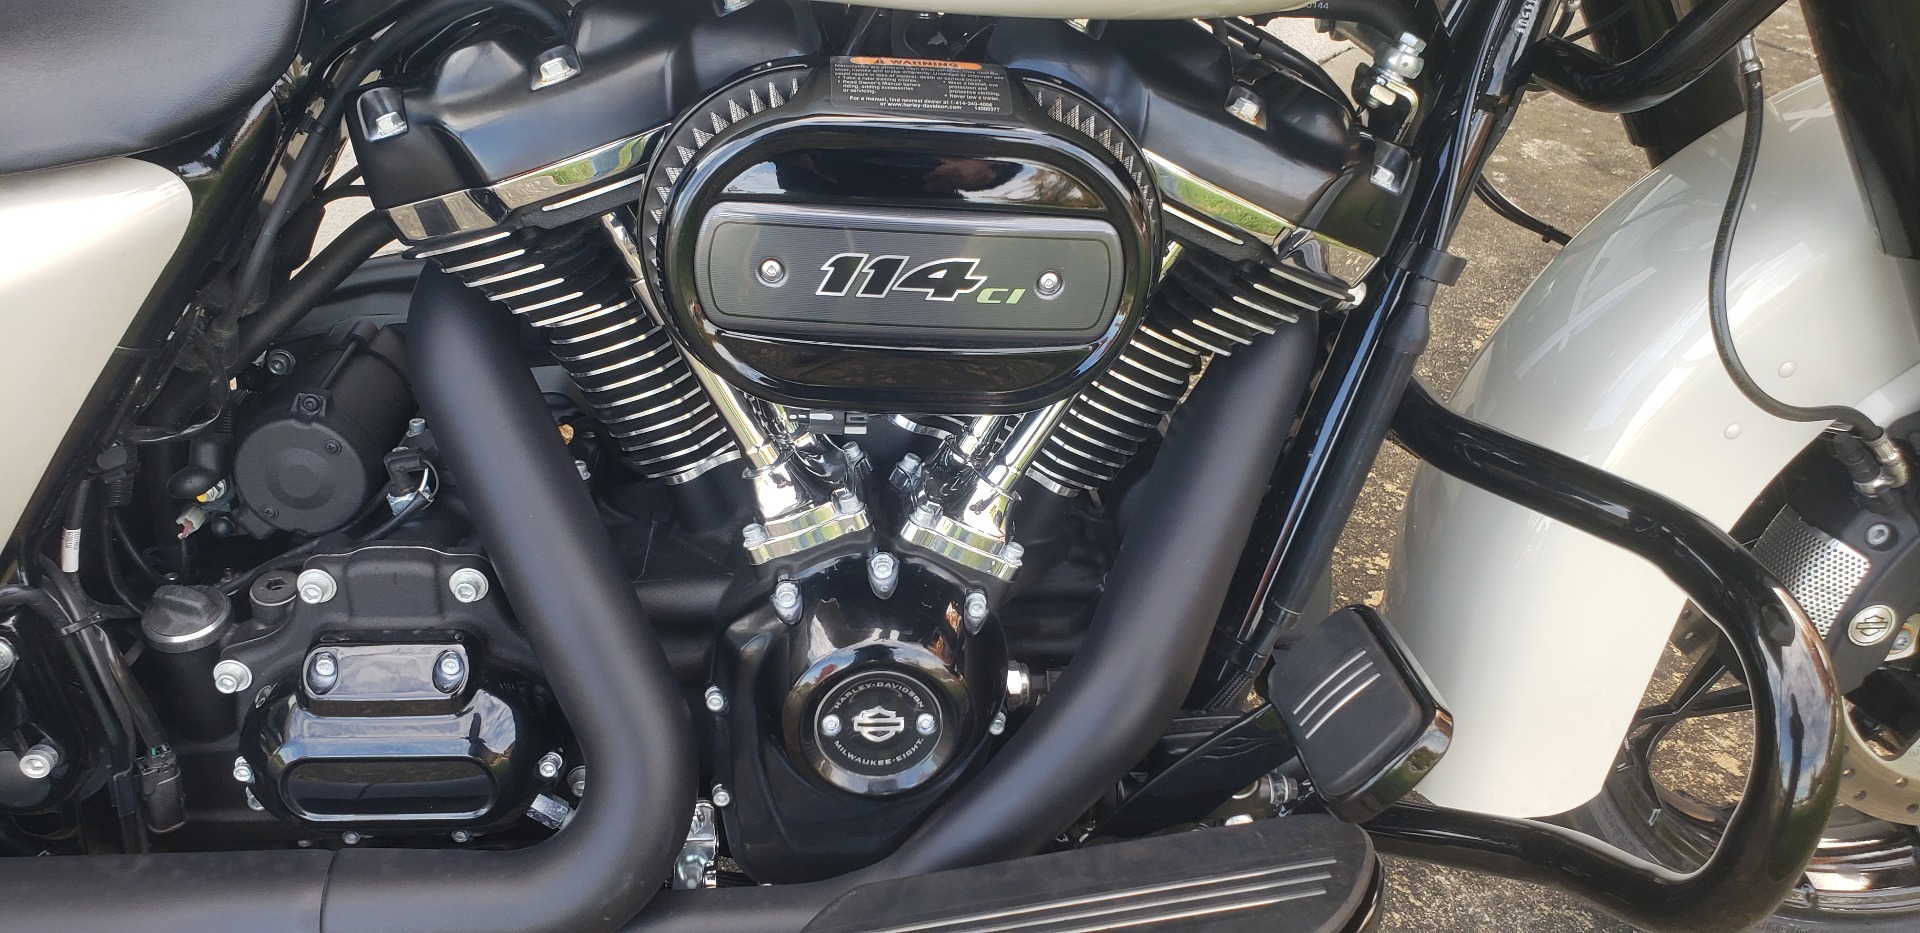 2022 Harley-Davidson ROAD GLIDE SPECIAL in Dumfries, Virginia - Photo 2